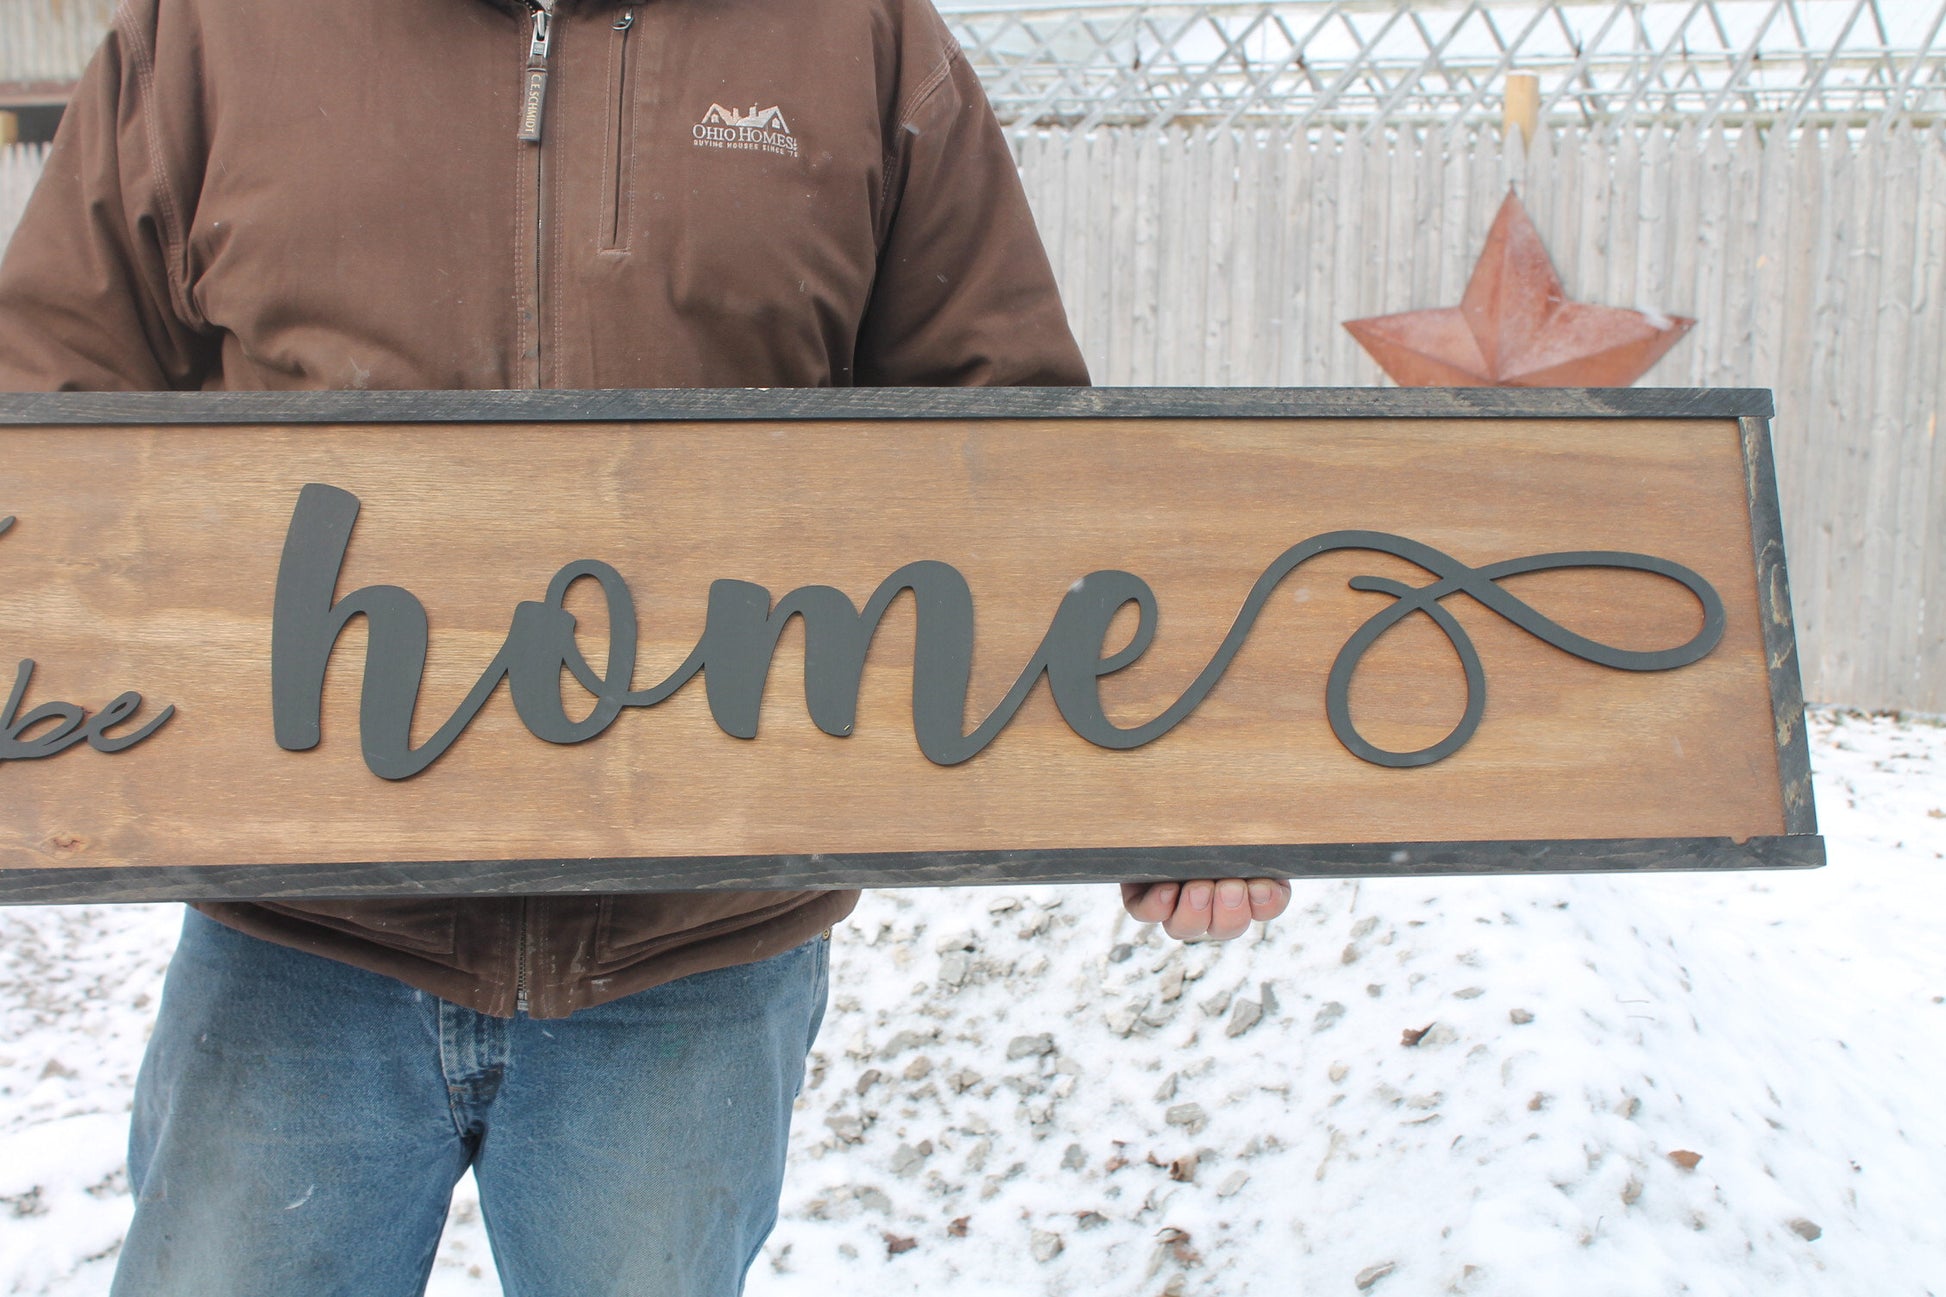 It Is so Good To Be Home, Large Custom Sign, Over-sized Rustic, Wood, Laser Cut Out, Raised Letters, Extra Large, Sign, Couch Sign Fireplace